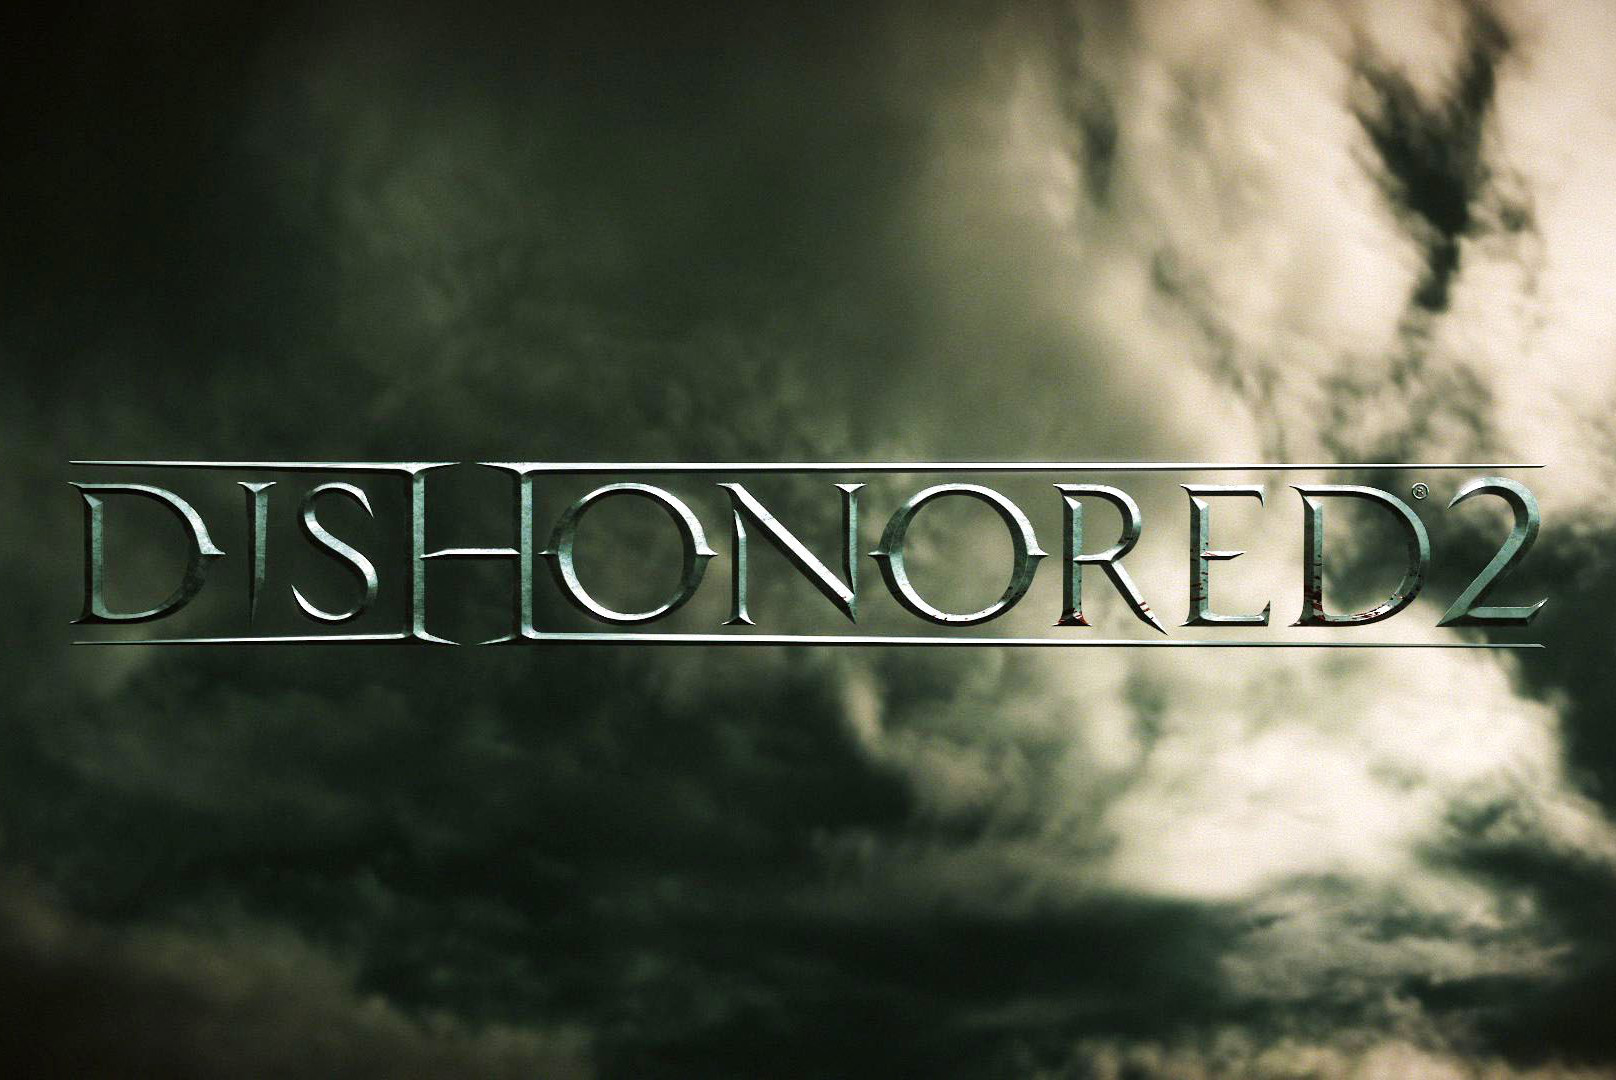  Dishonored 2 - PlayStation 4 : Bethesda Softworks Inc: Video  Games